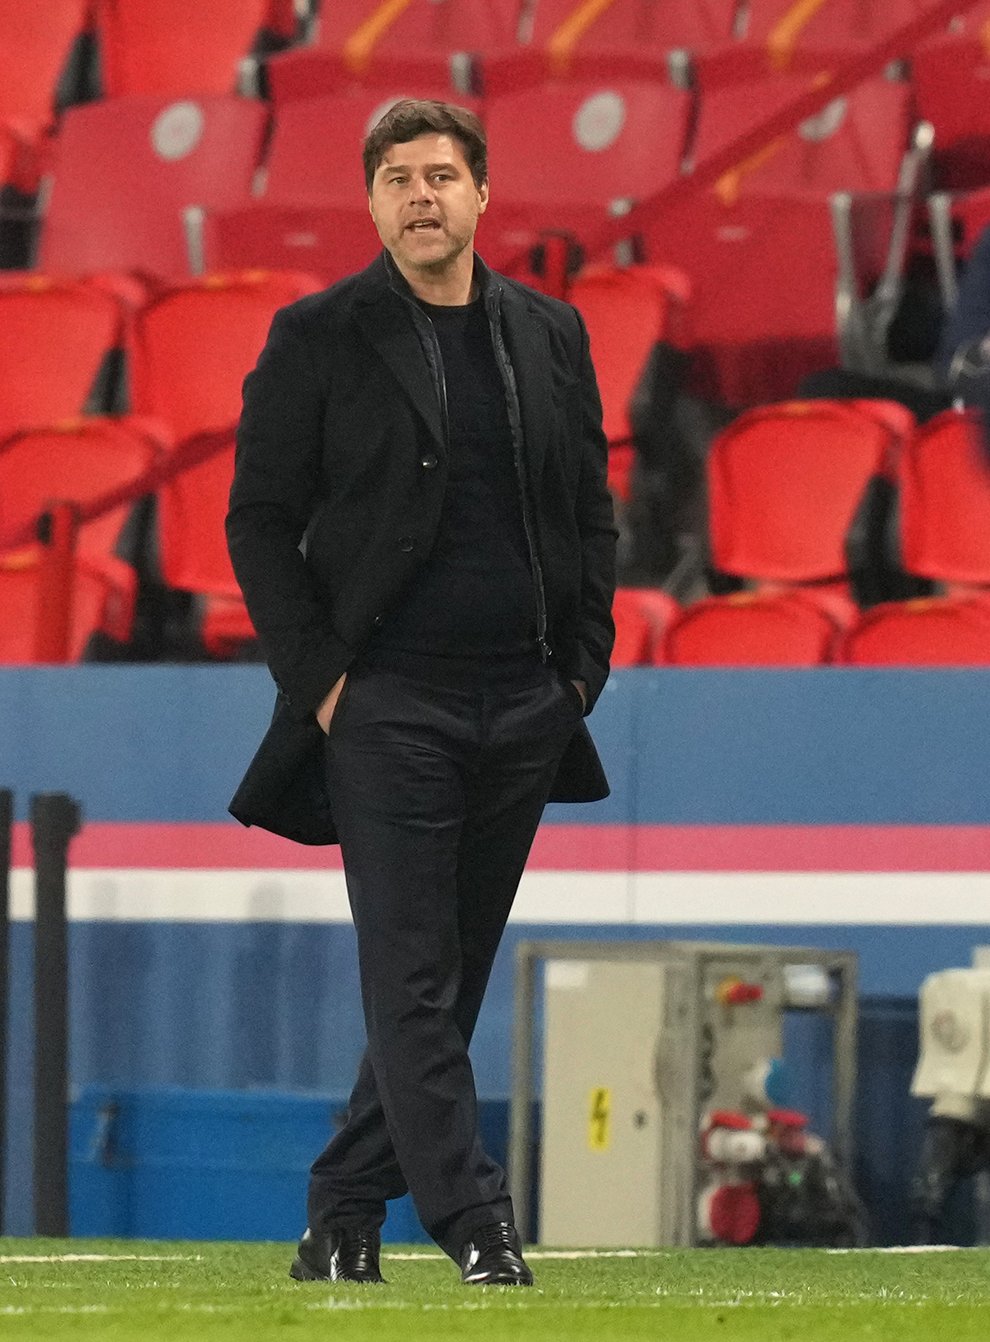 Mauricio Pochettino has been heavily linked with the Manchester United job (Julien Poupert/PA).